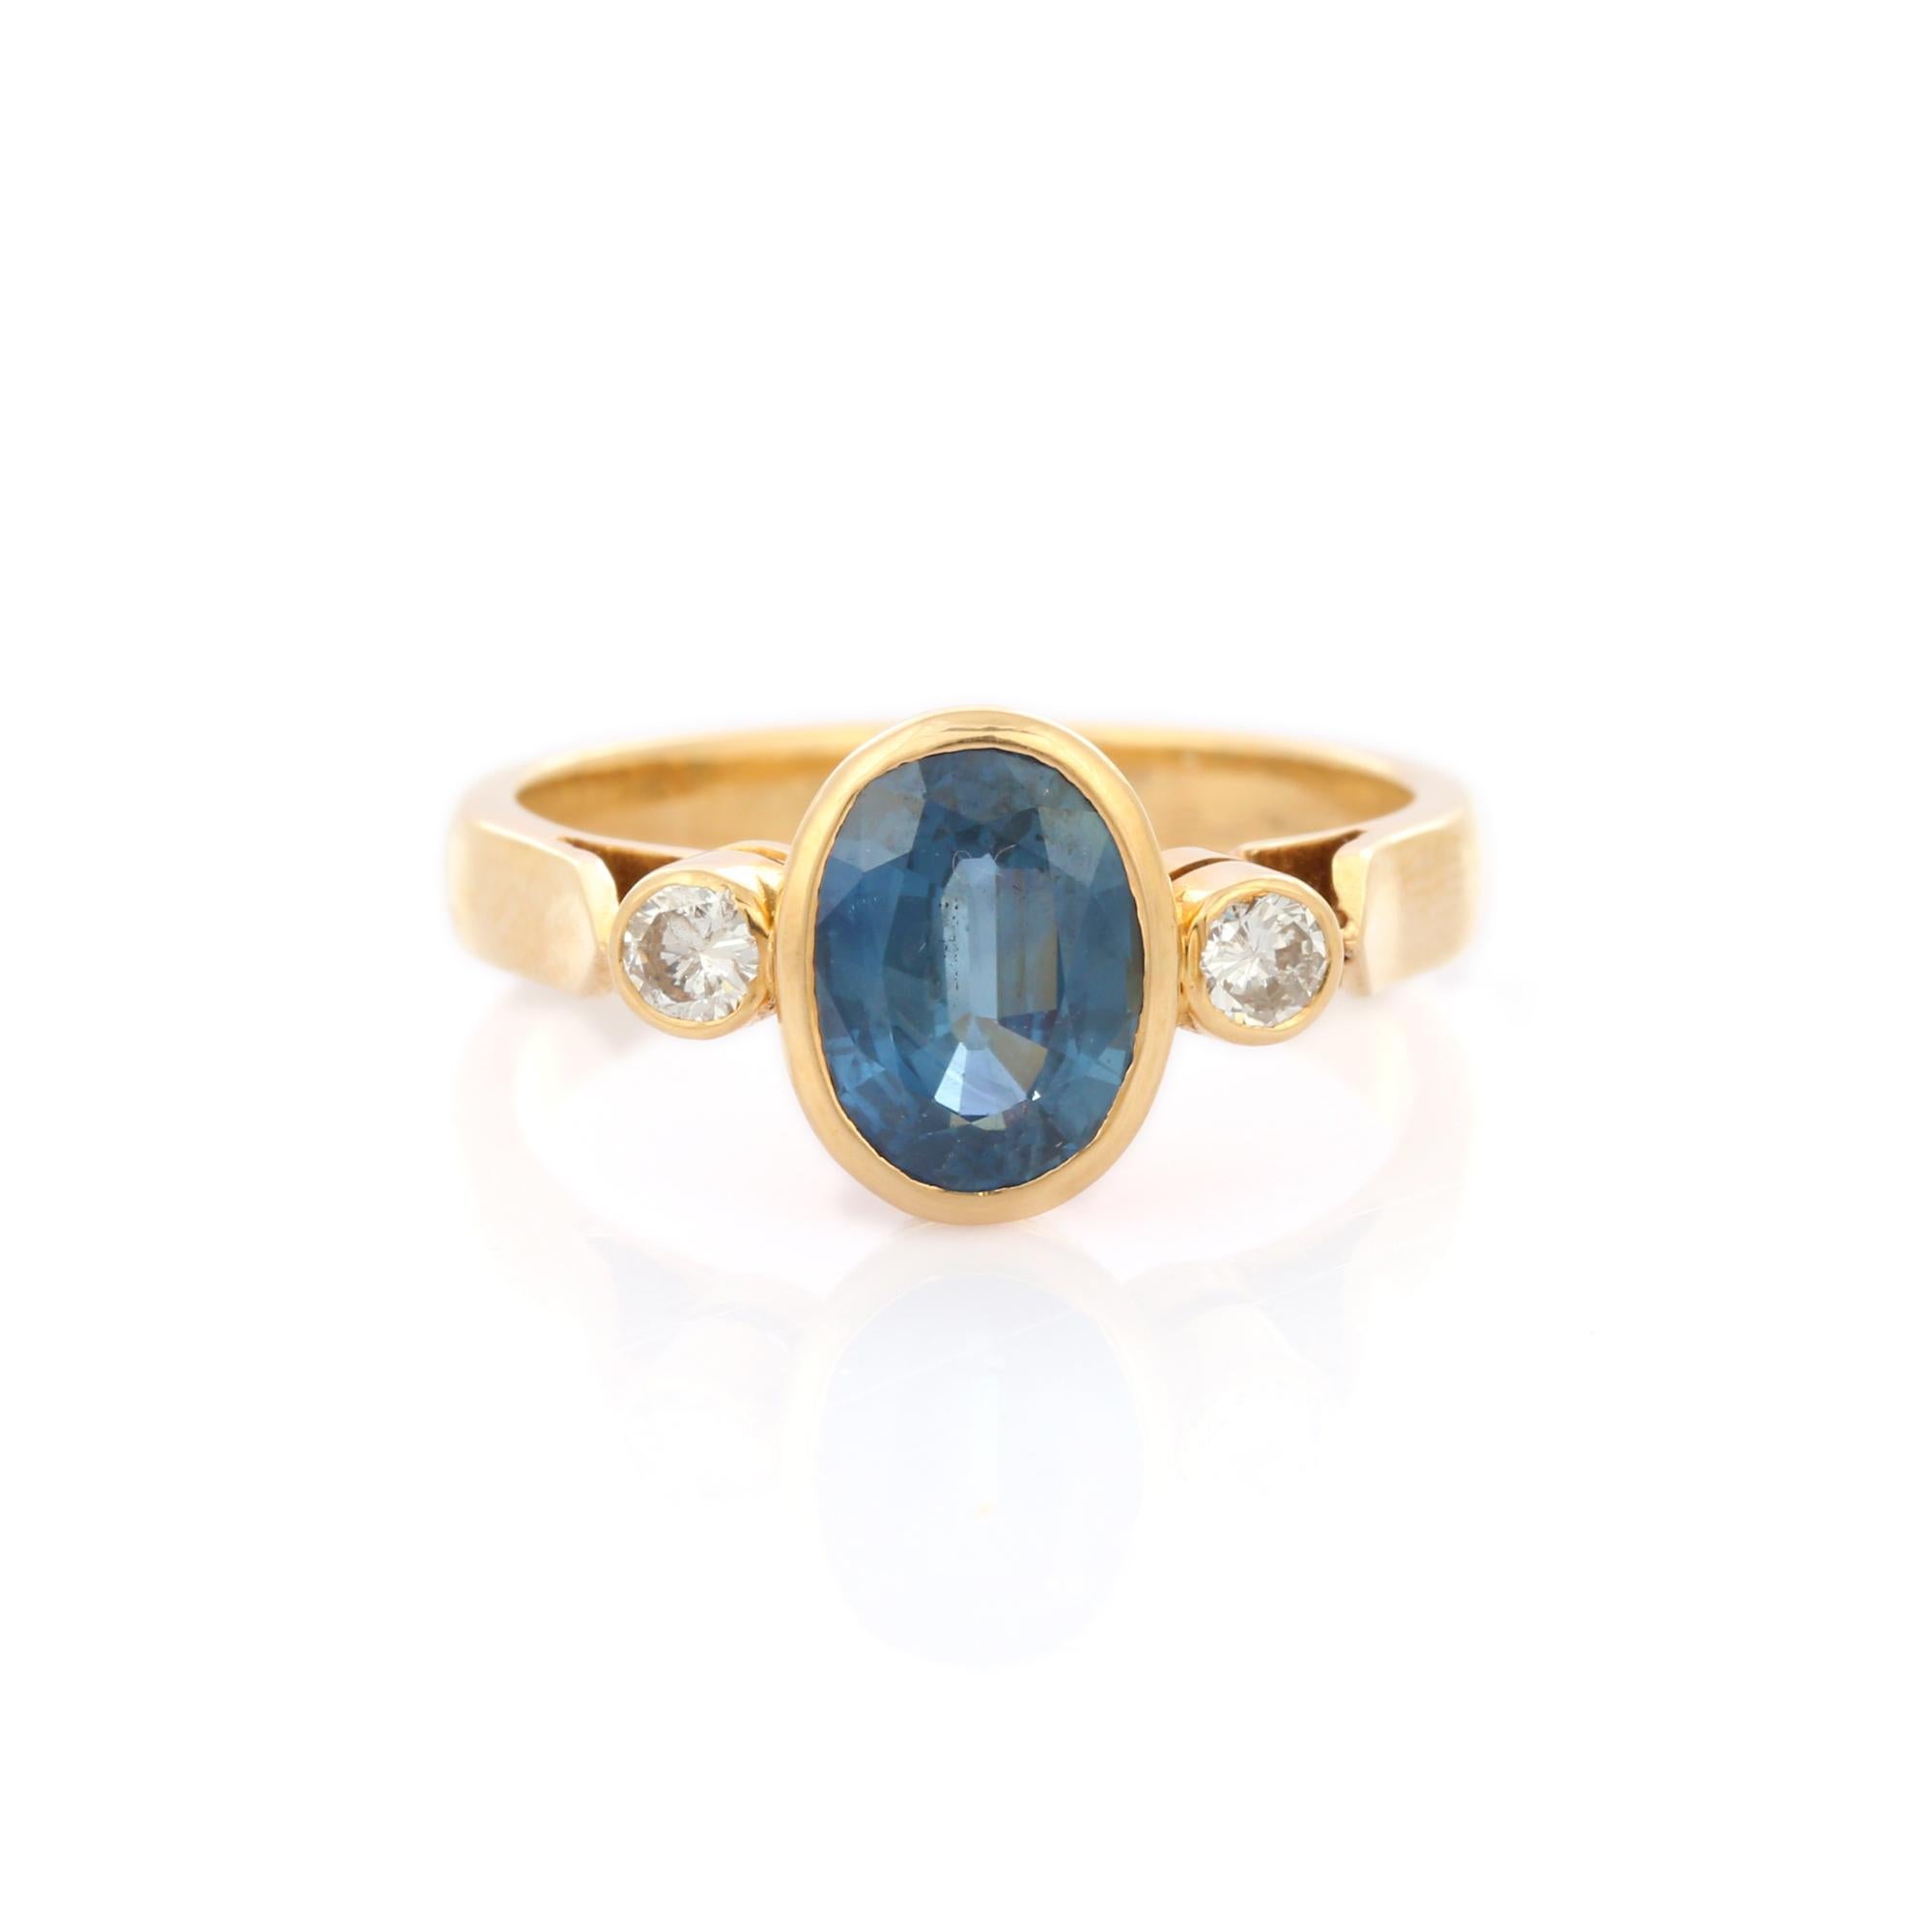 For Sale:  2.8 Ct Blue Sapphire & Diamond Three Stone Engagement Ring in 18K Yellow Gold 2